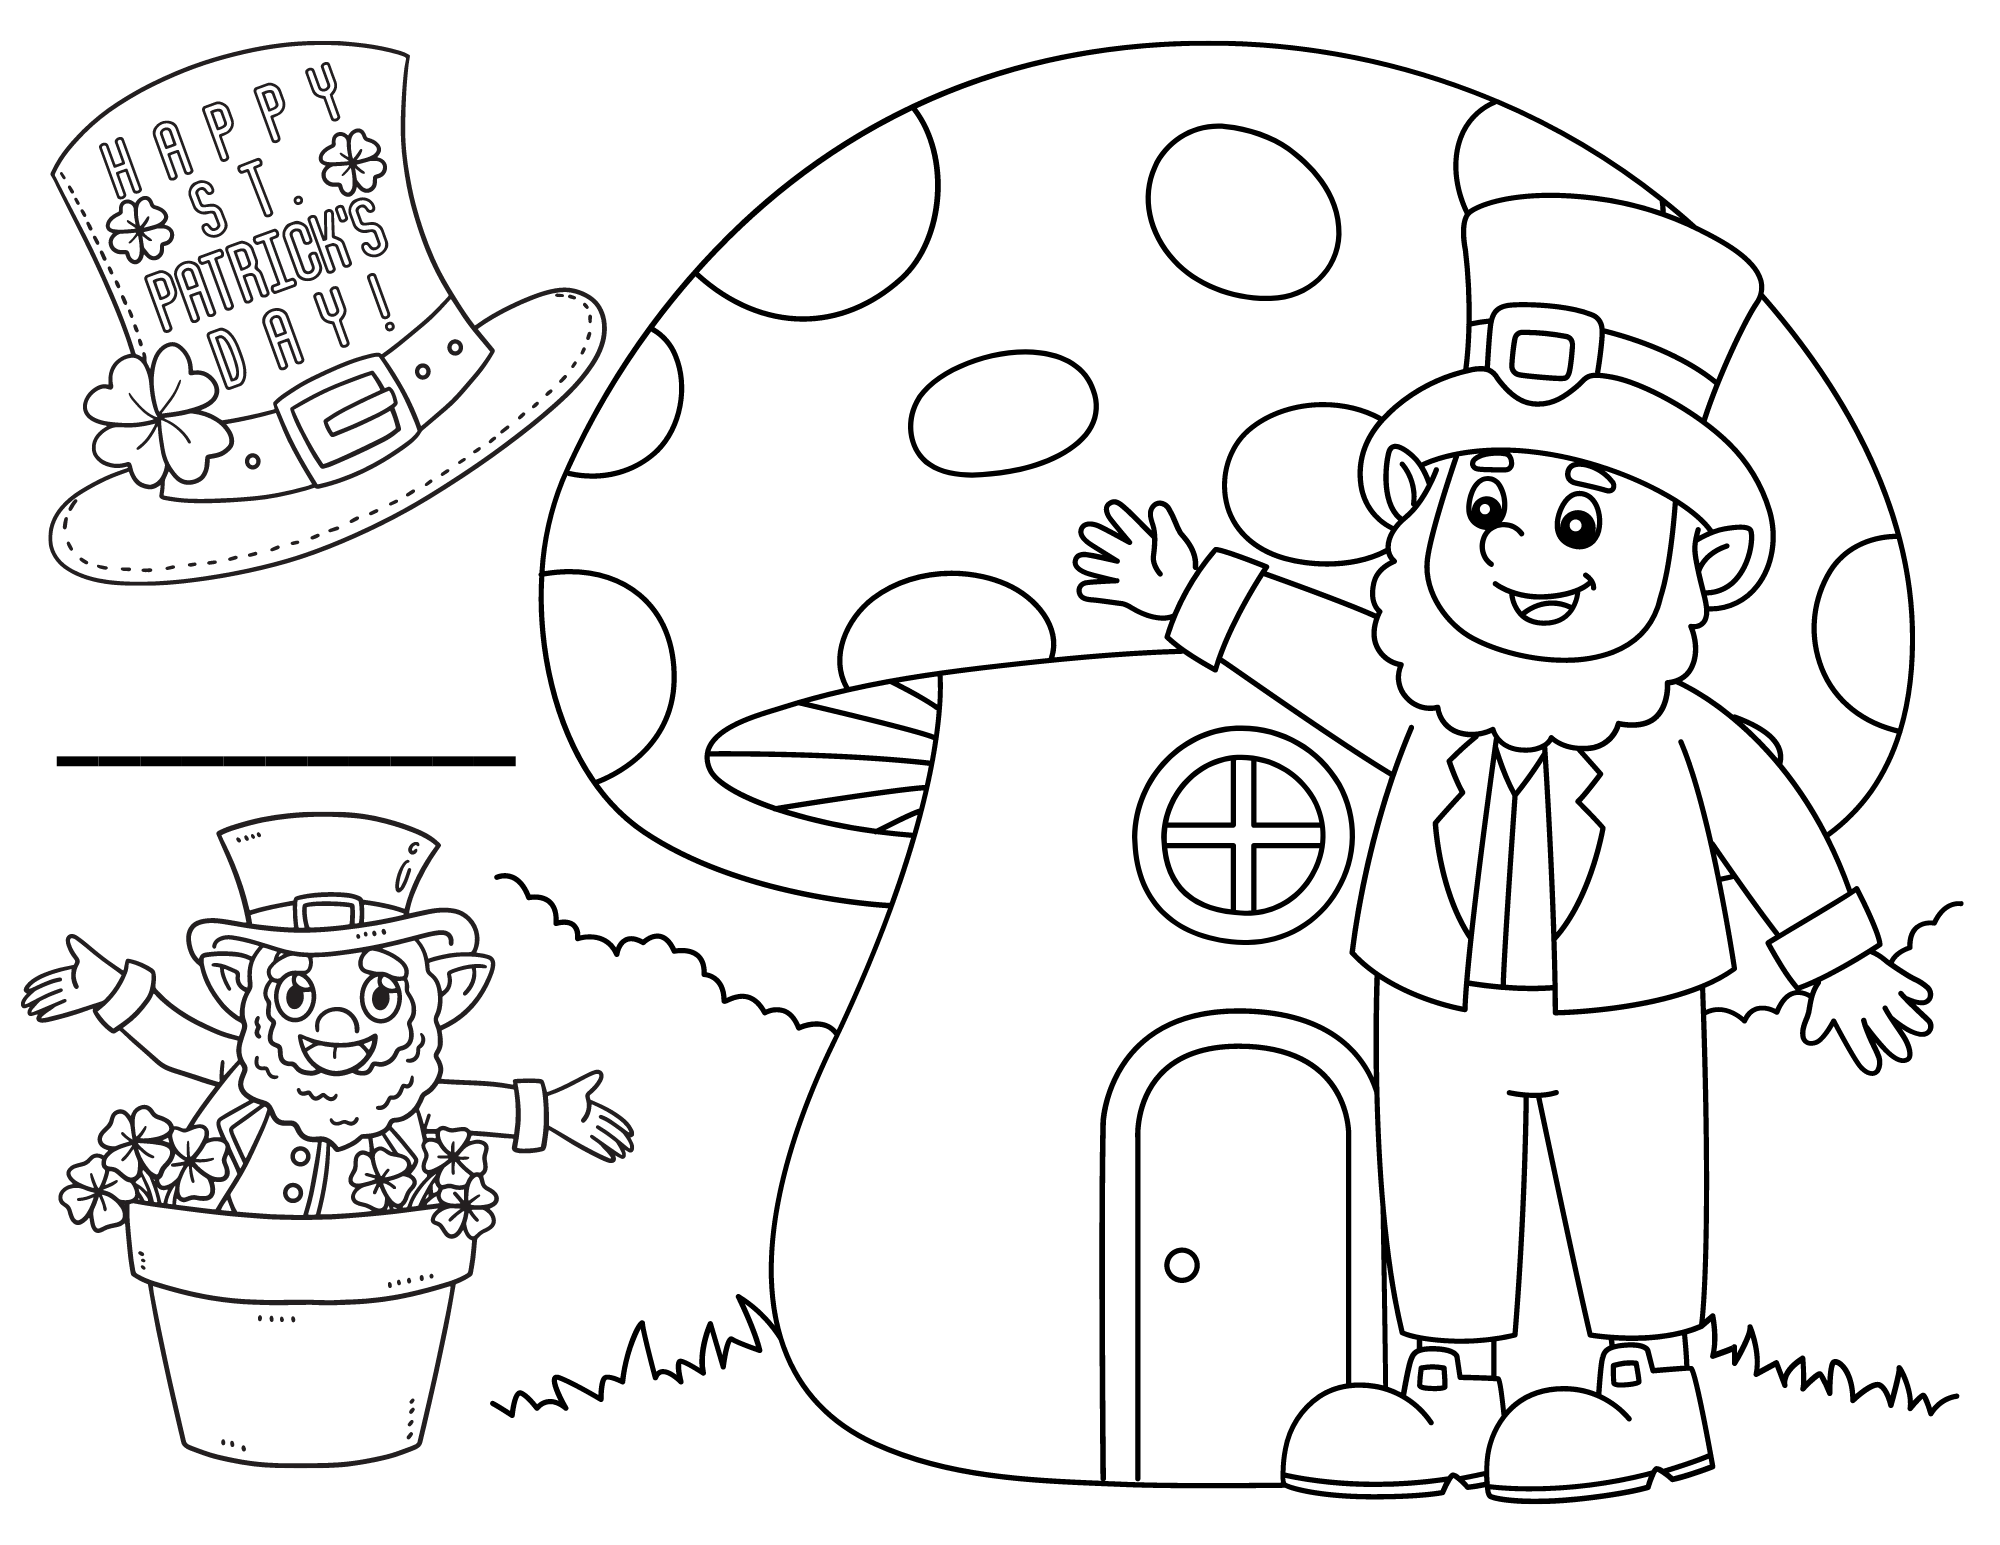 Saint Patrick's Day coloring page